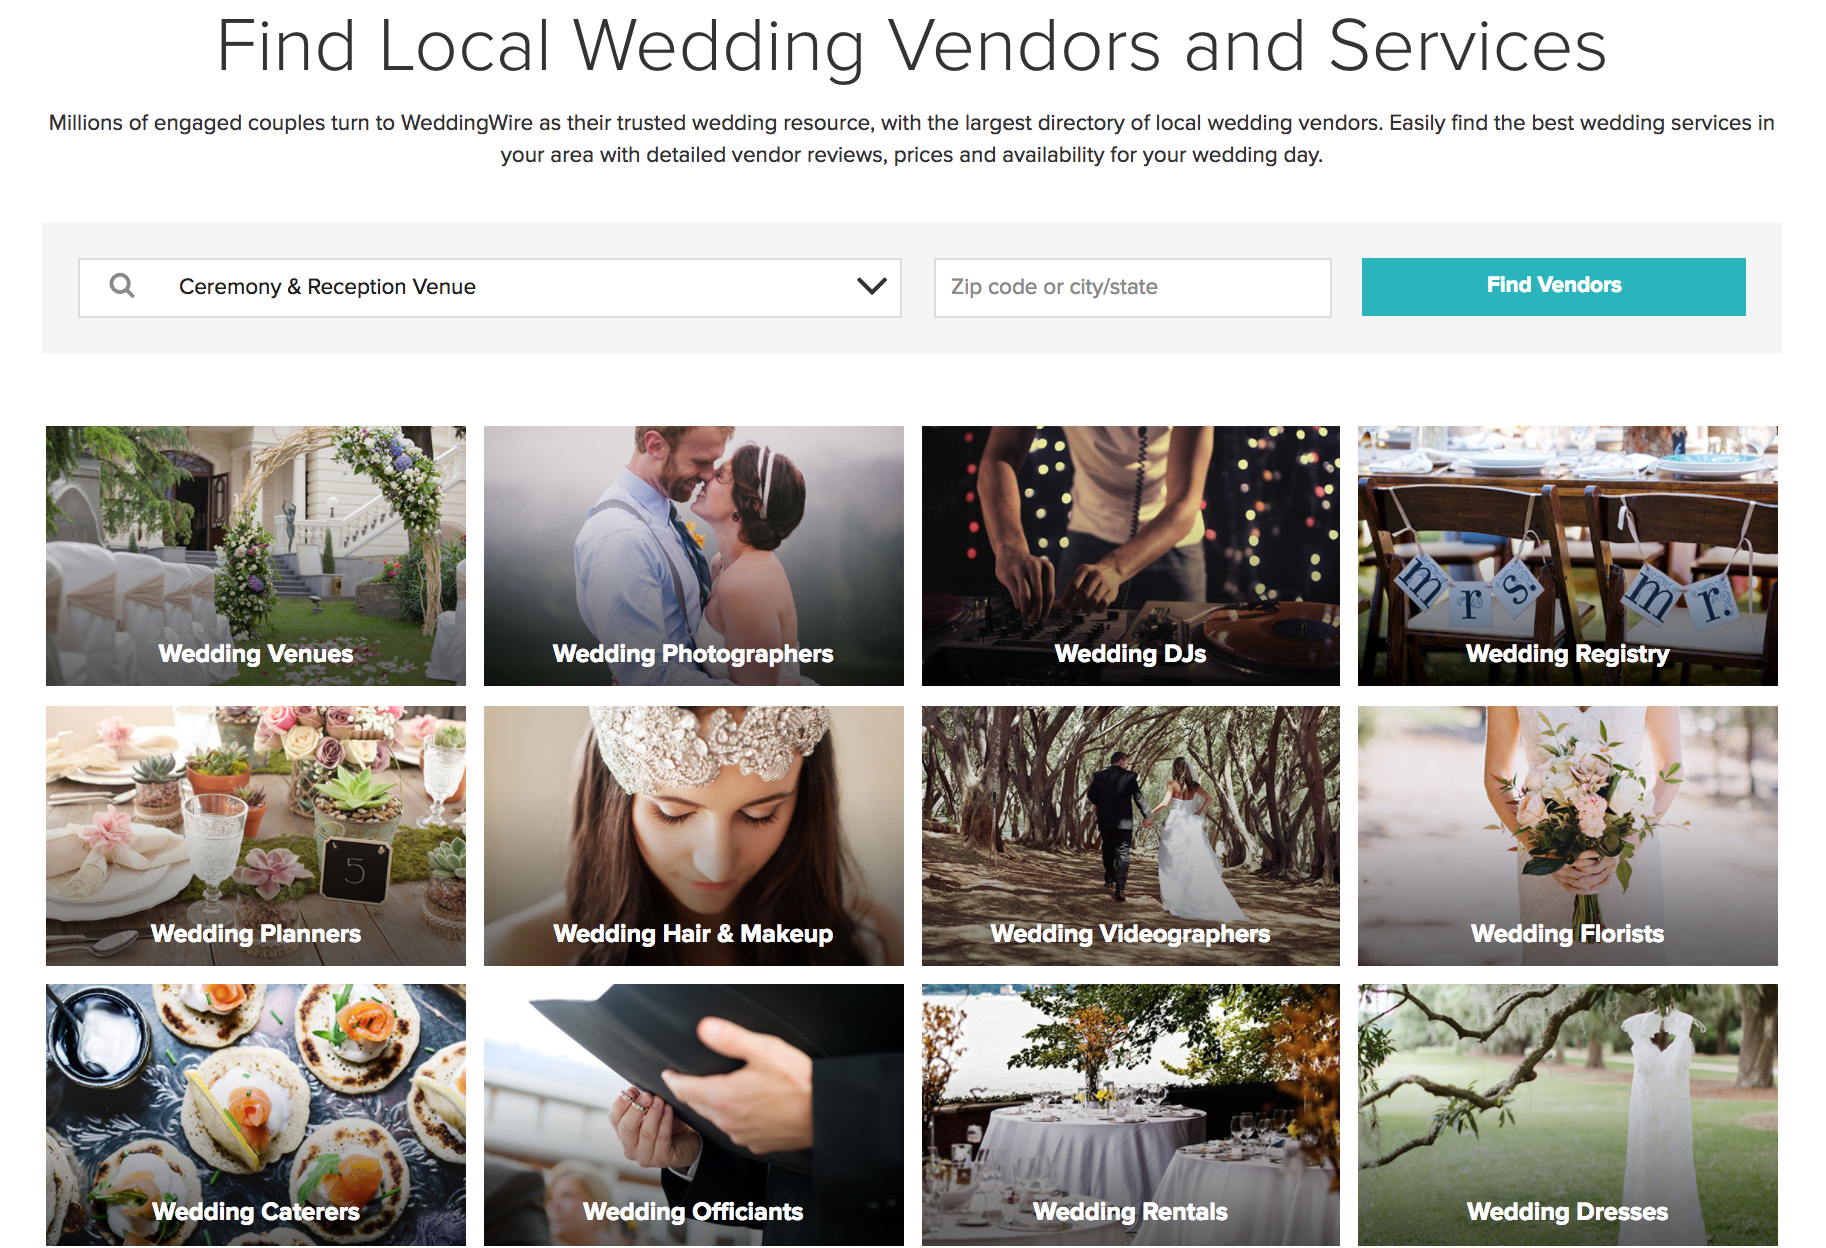 How WeddingWire Helped Me Plan My Wedding In 3 Months Esther Santer Fashion Blog NYC Street Style Blogger Outfit OOTD Trendy Hair Makeup Beauty Wedding Planning Dress Gown Prep Budget Tool Registry Vendors Florist Band Venue Videographer Photographer.png